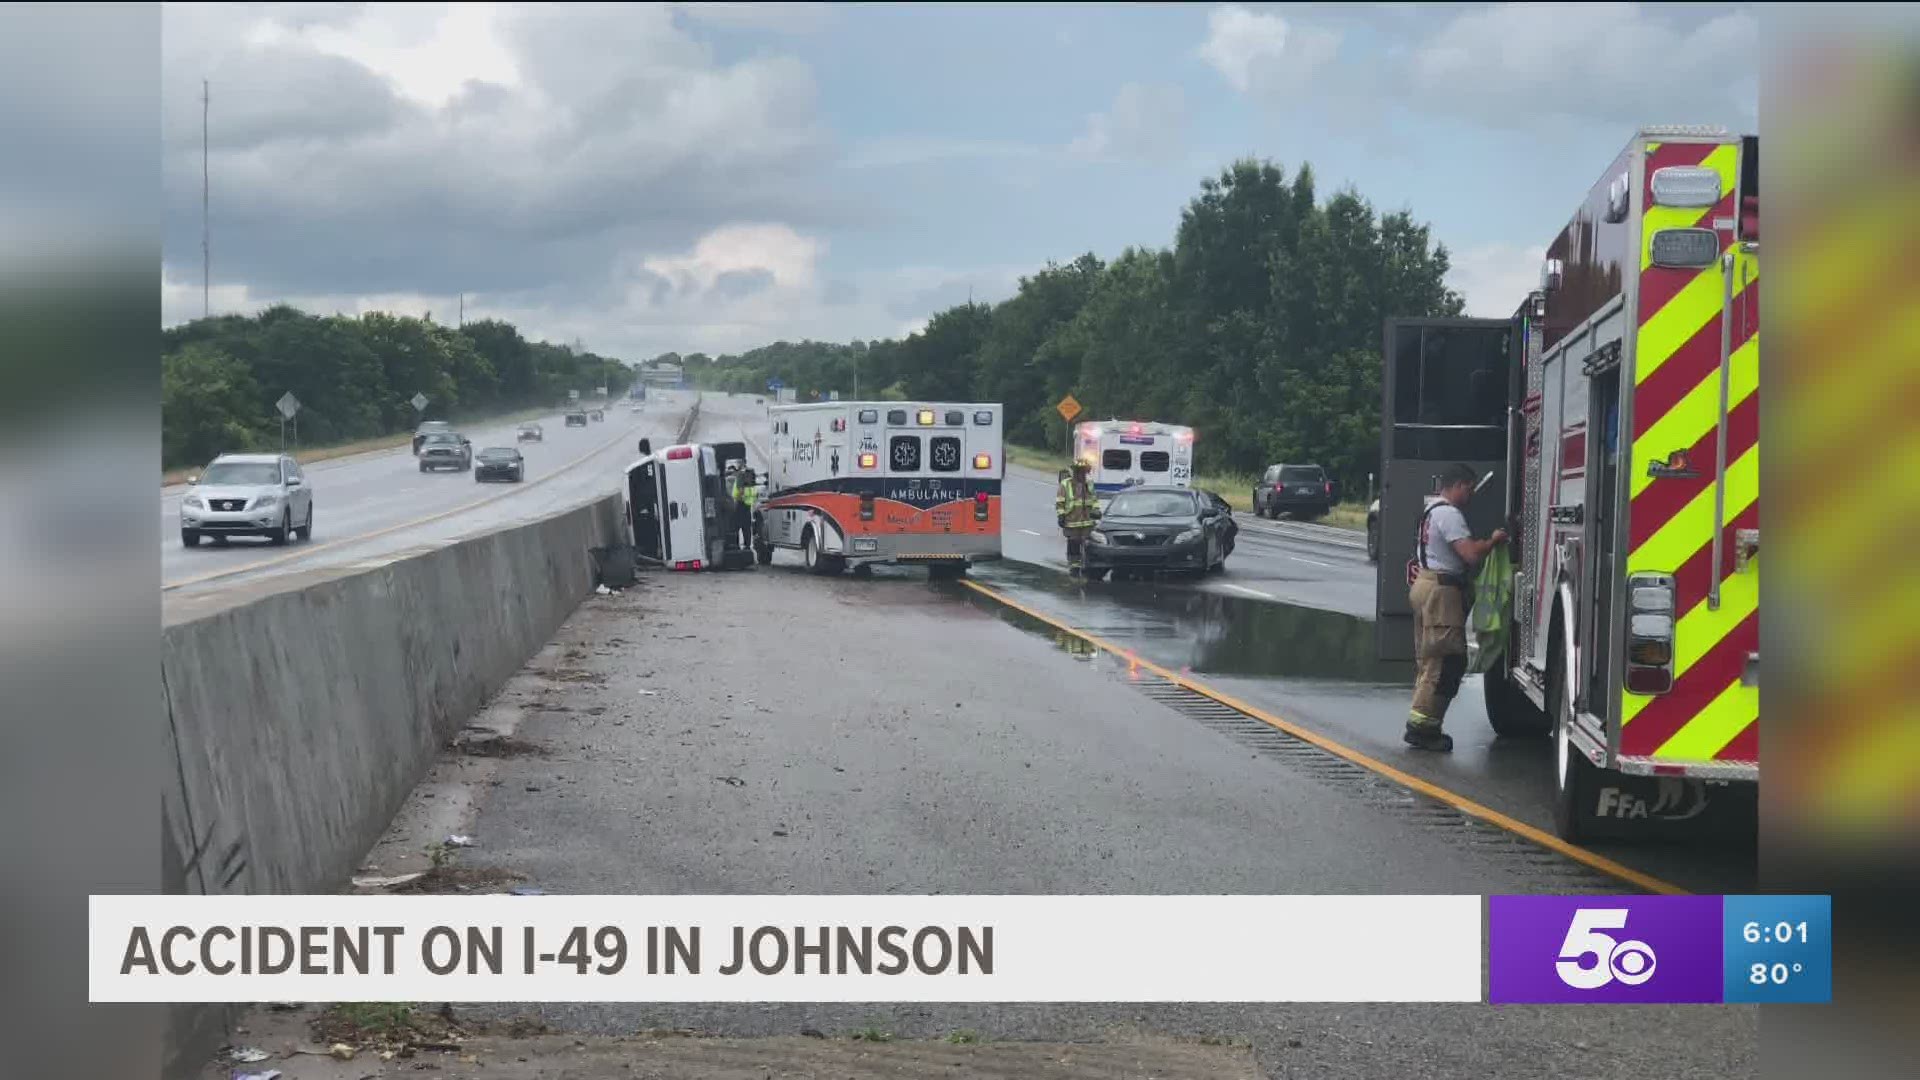 Accident on I-49 in Johnson.